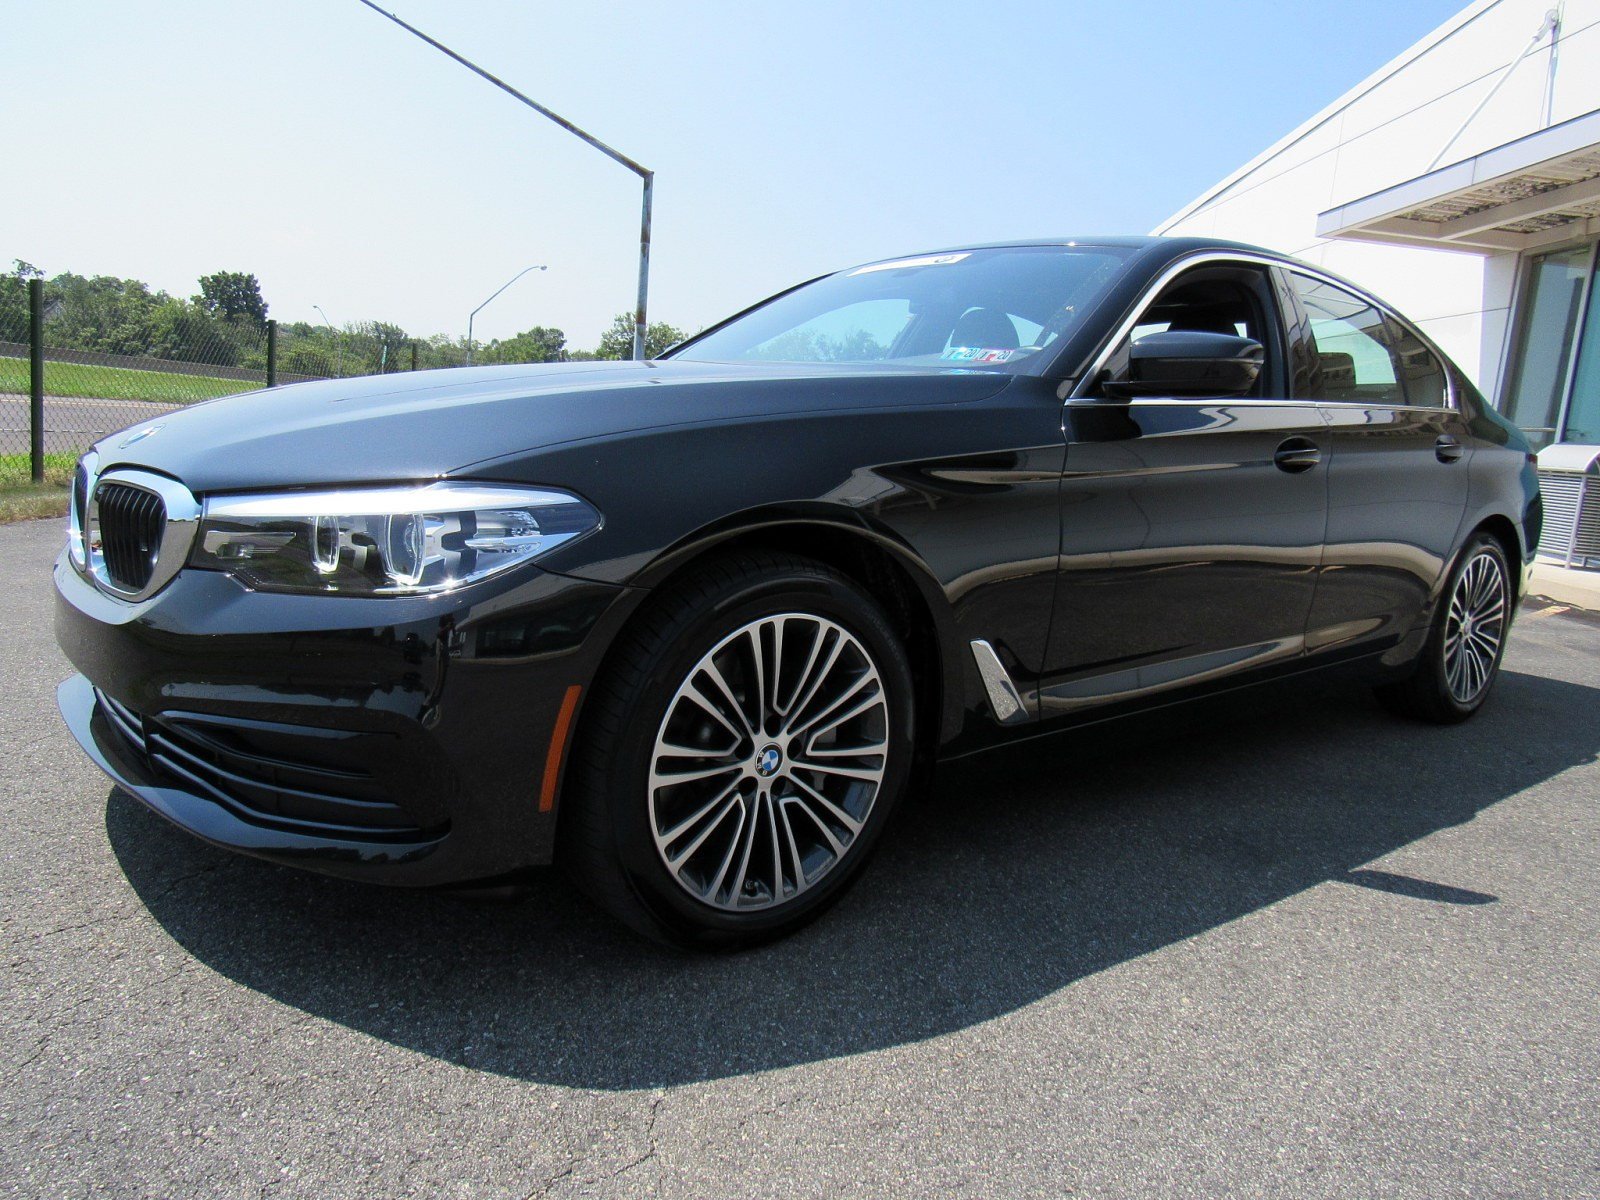 Pre-Owned 2019 BMW 5 Series AWD 530i xDrive in Allentown #WW08686S ...